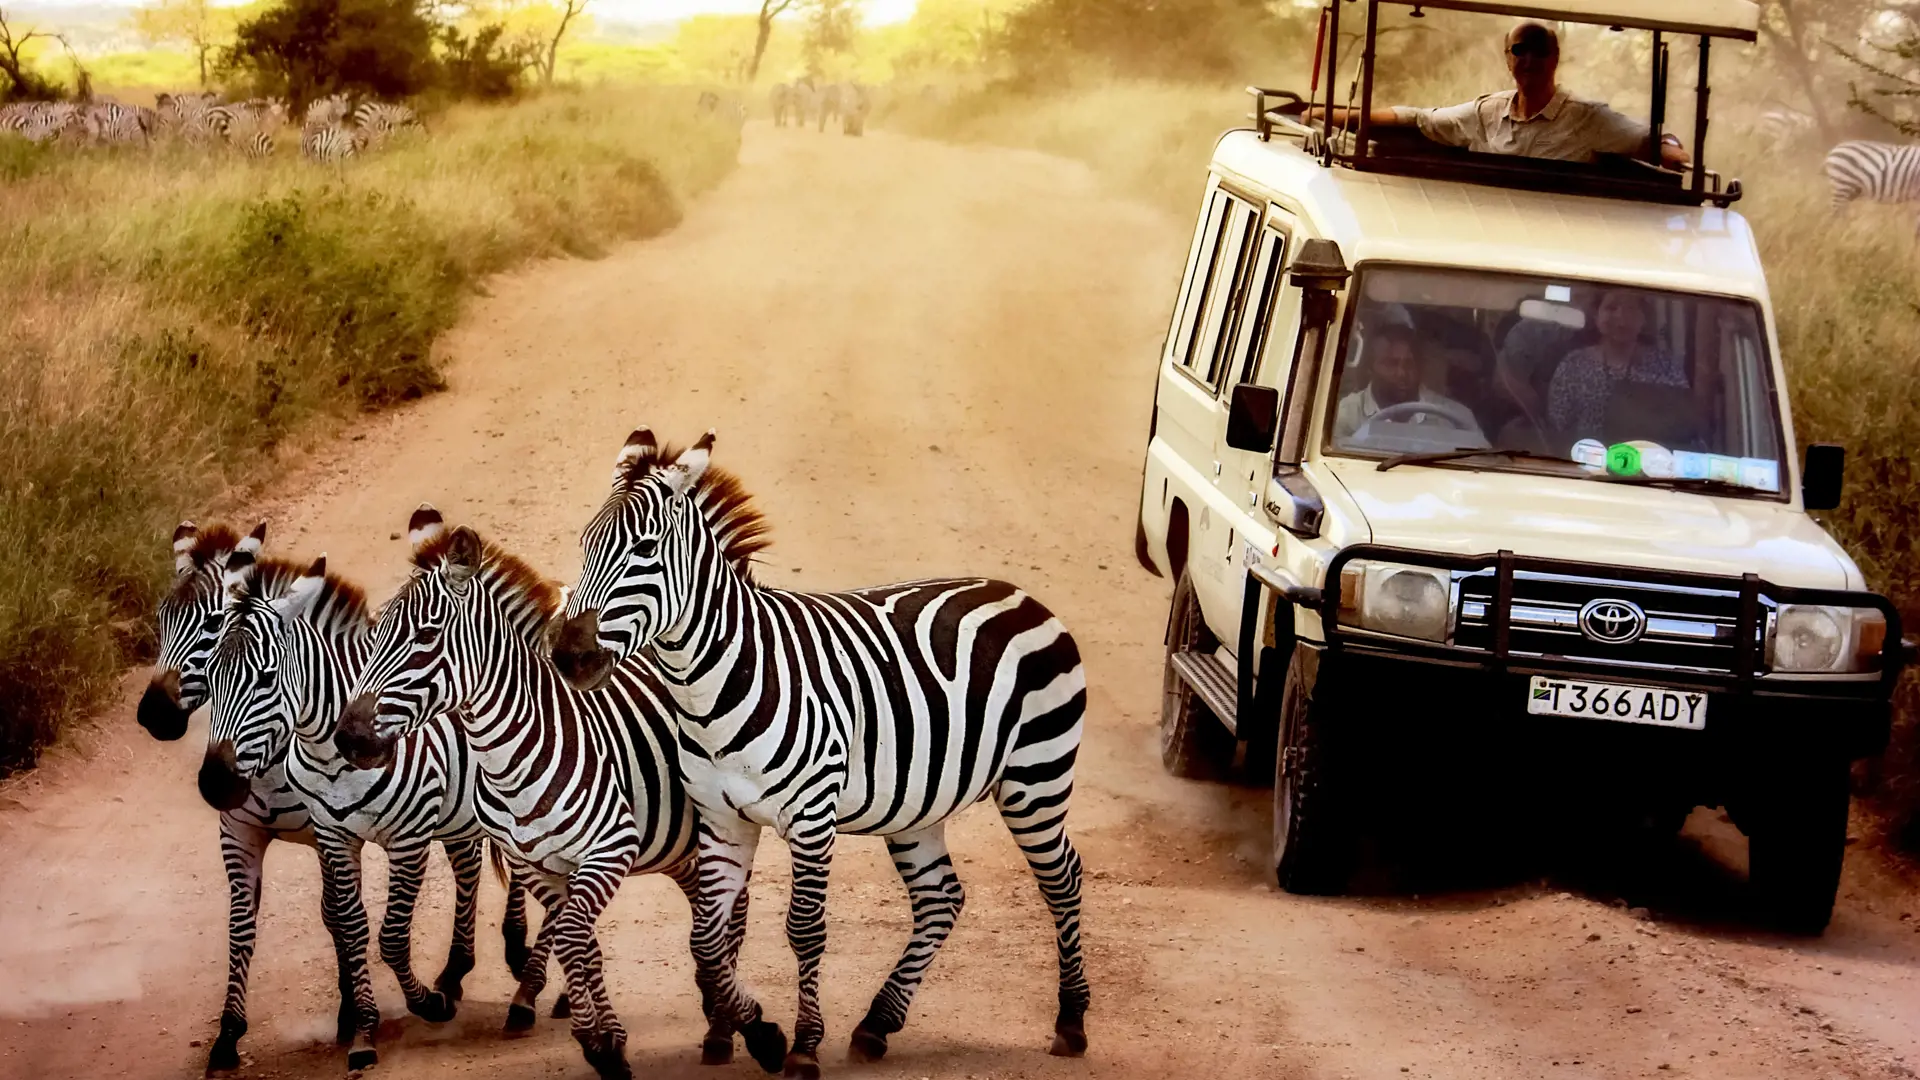 shutterstock_551326318 Zebras on the road in Serengeti national park in front of the jeep with tourists..jpg